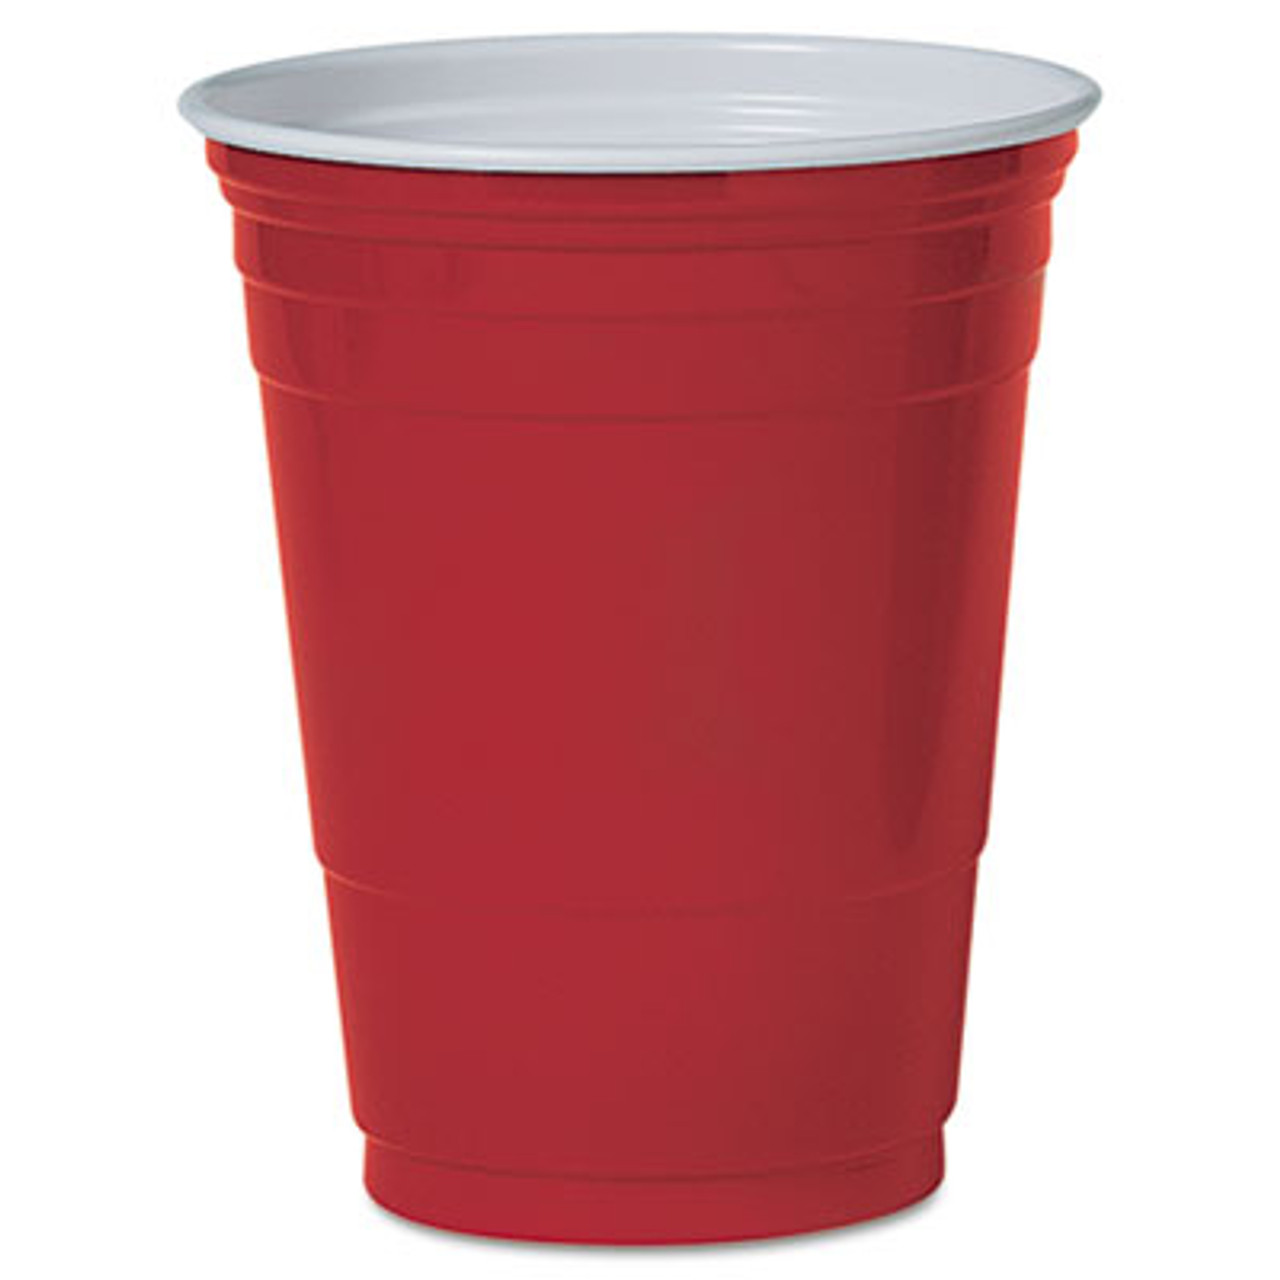 DCCP16RPK - $14.34 - Solo Plastic Party Cold Cups 16oz Red 50 Pack